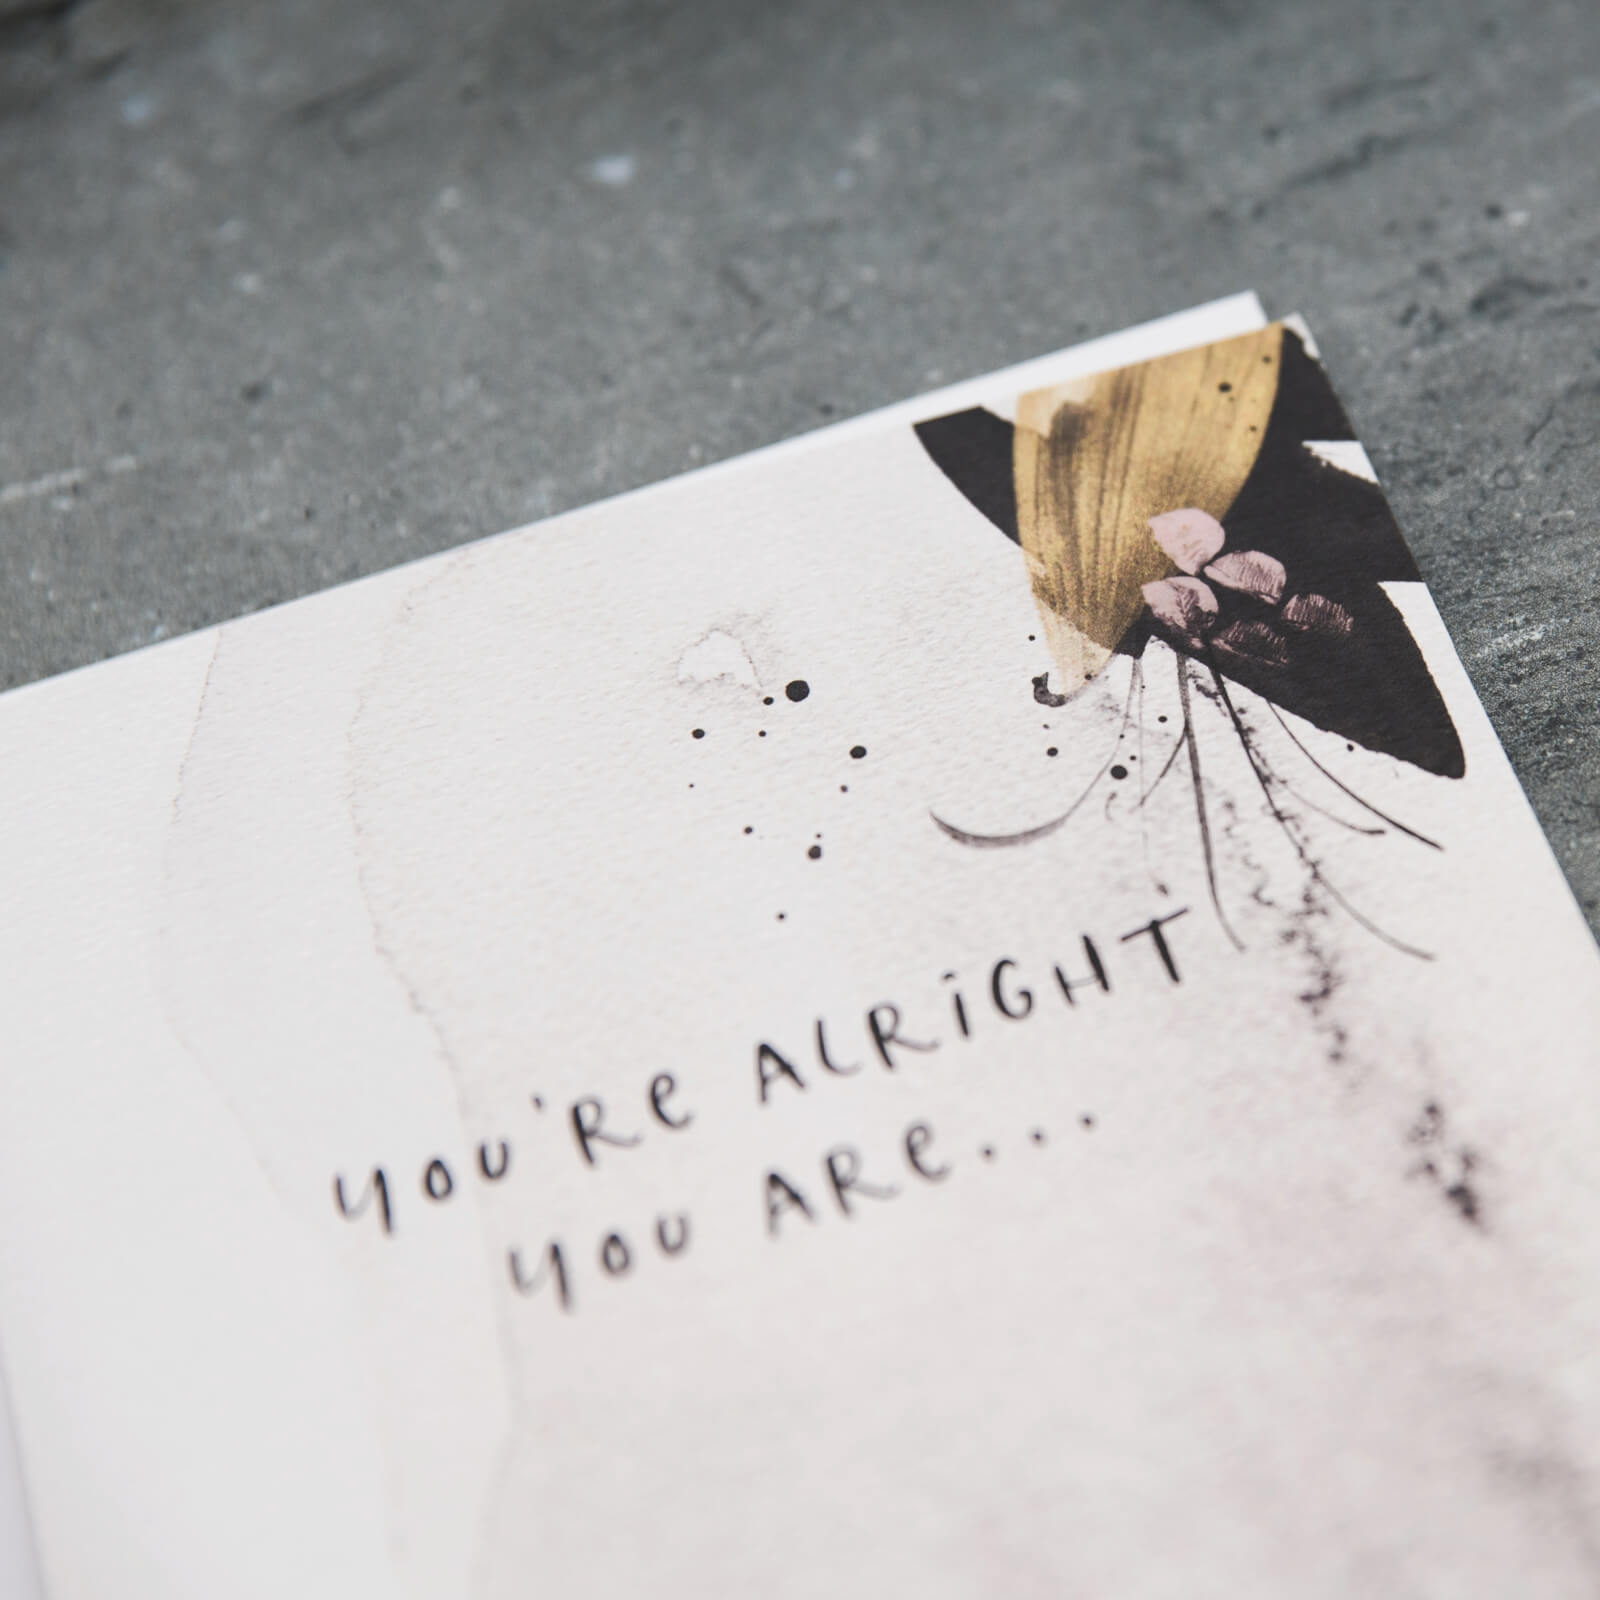 &#39;You&#39;re Alright You Are&#39; Funny Anniversary Card - I am Nat Ltd - Greeting Card